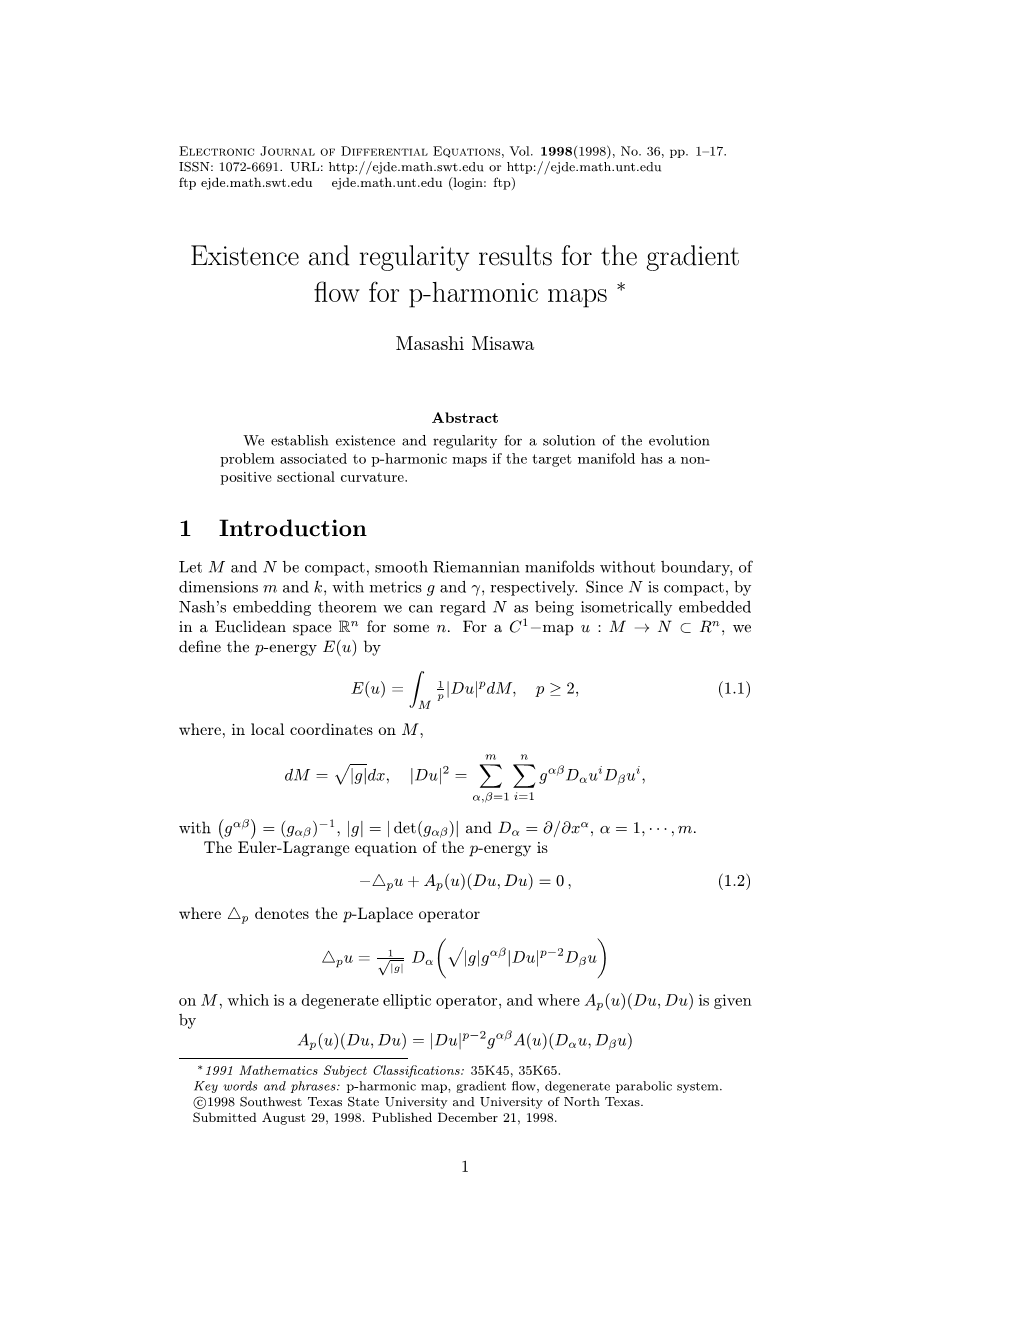 Existence and Regularity Results for the Gradient Flow for P-Harmonic Maps